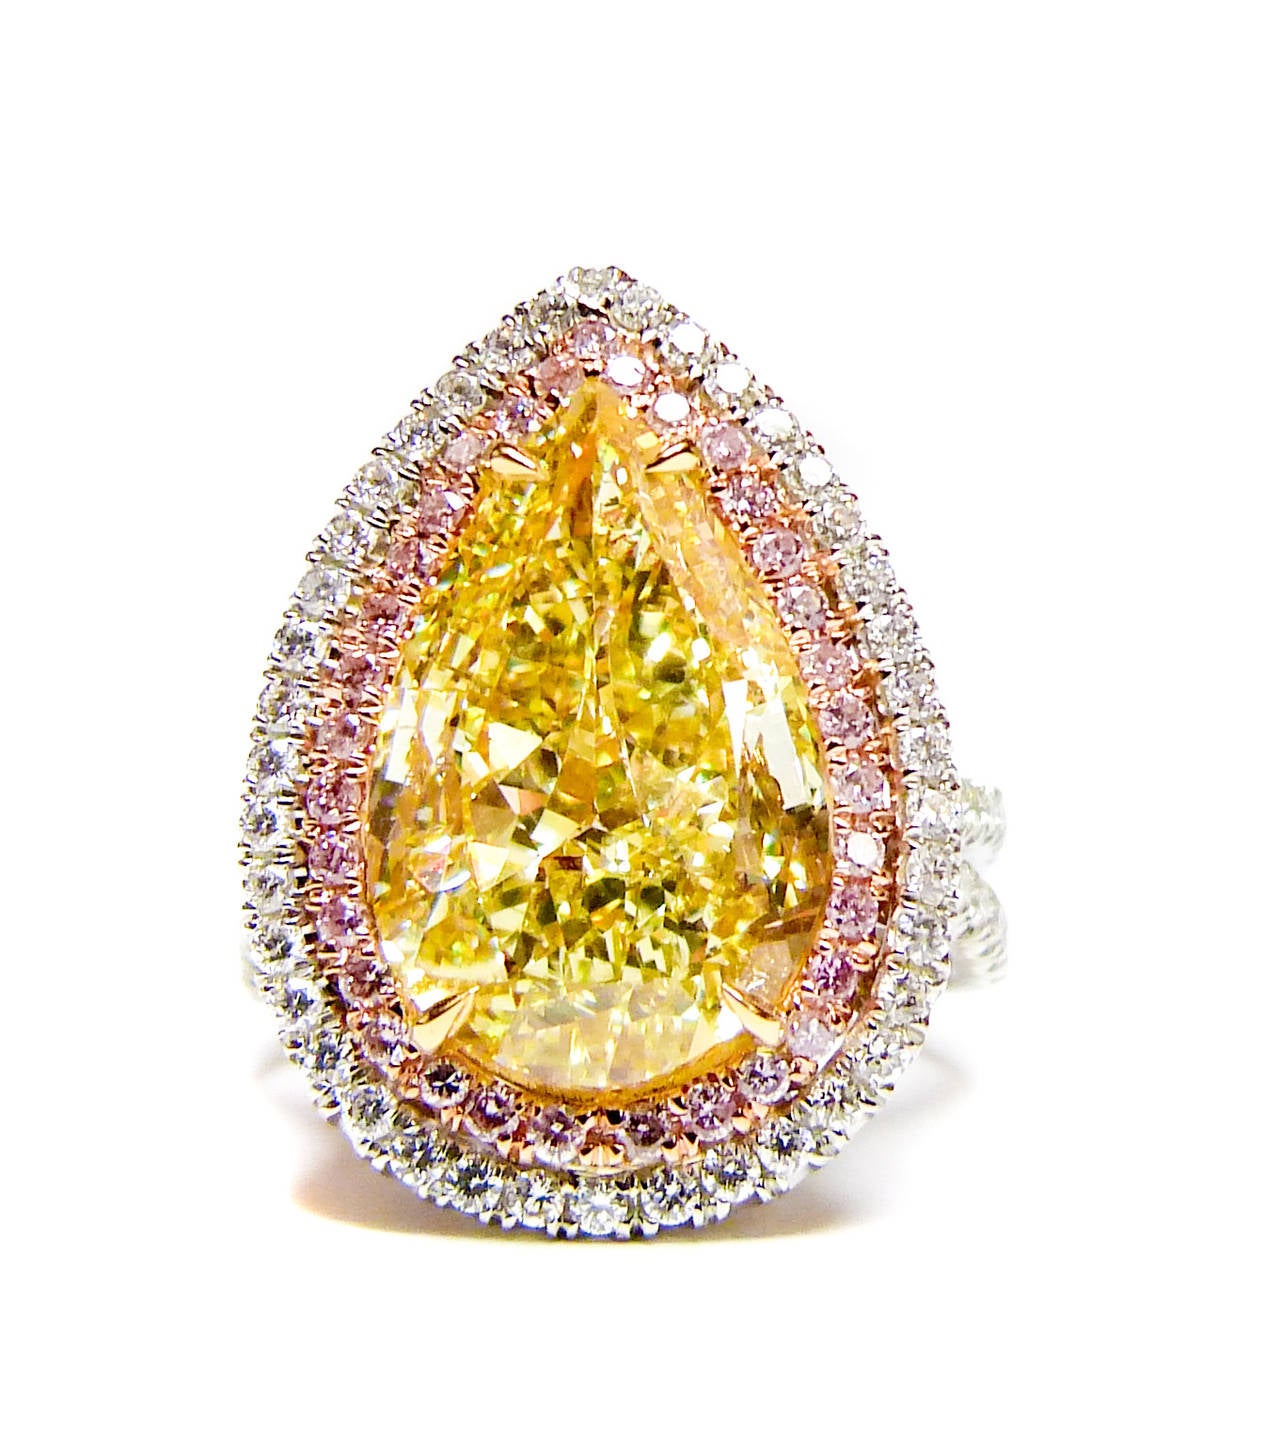 Beautiful Fancy Yellow Engagement Ring, features 6.02 Carat Fancy Yellow Pear Shape Diamond, SI1 in Clarity. Certified by GIA Laboratory. 

The diamond looks like 8 Carats based on proportions. 

The center stone is surrounded by micropave pink